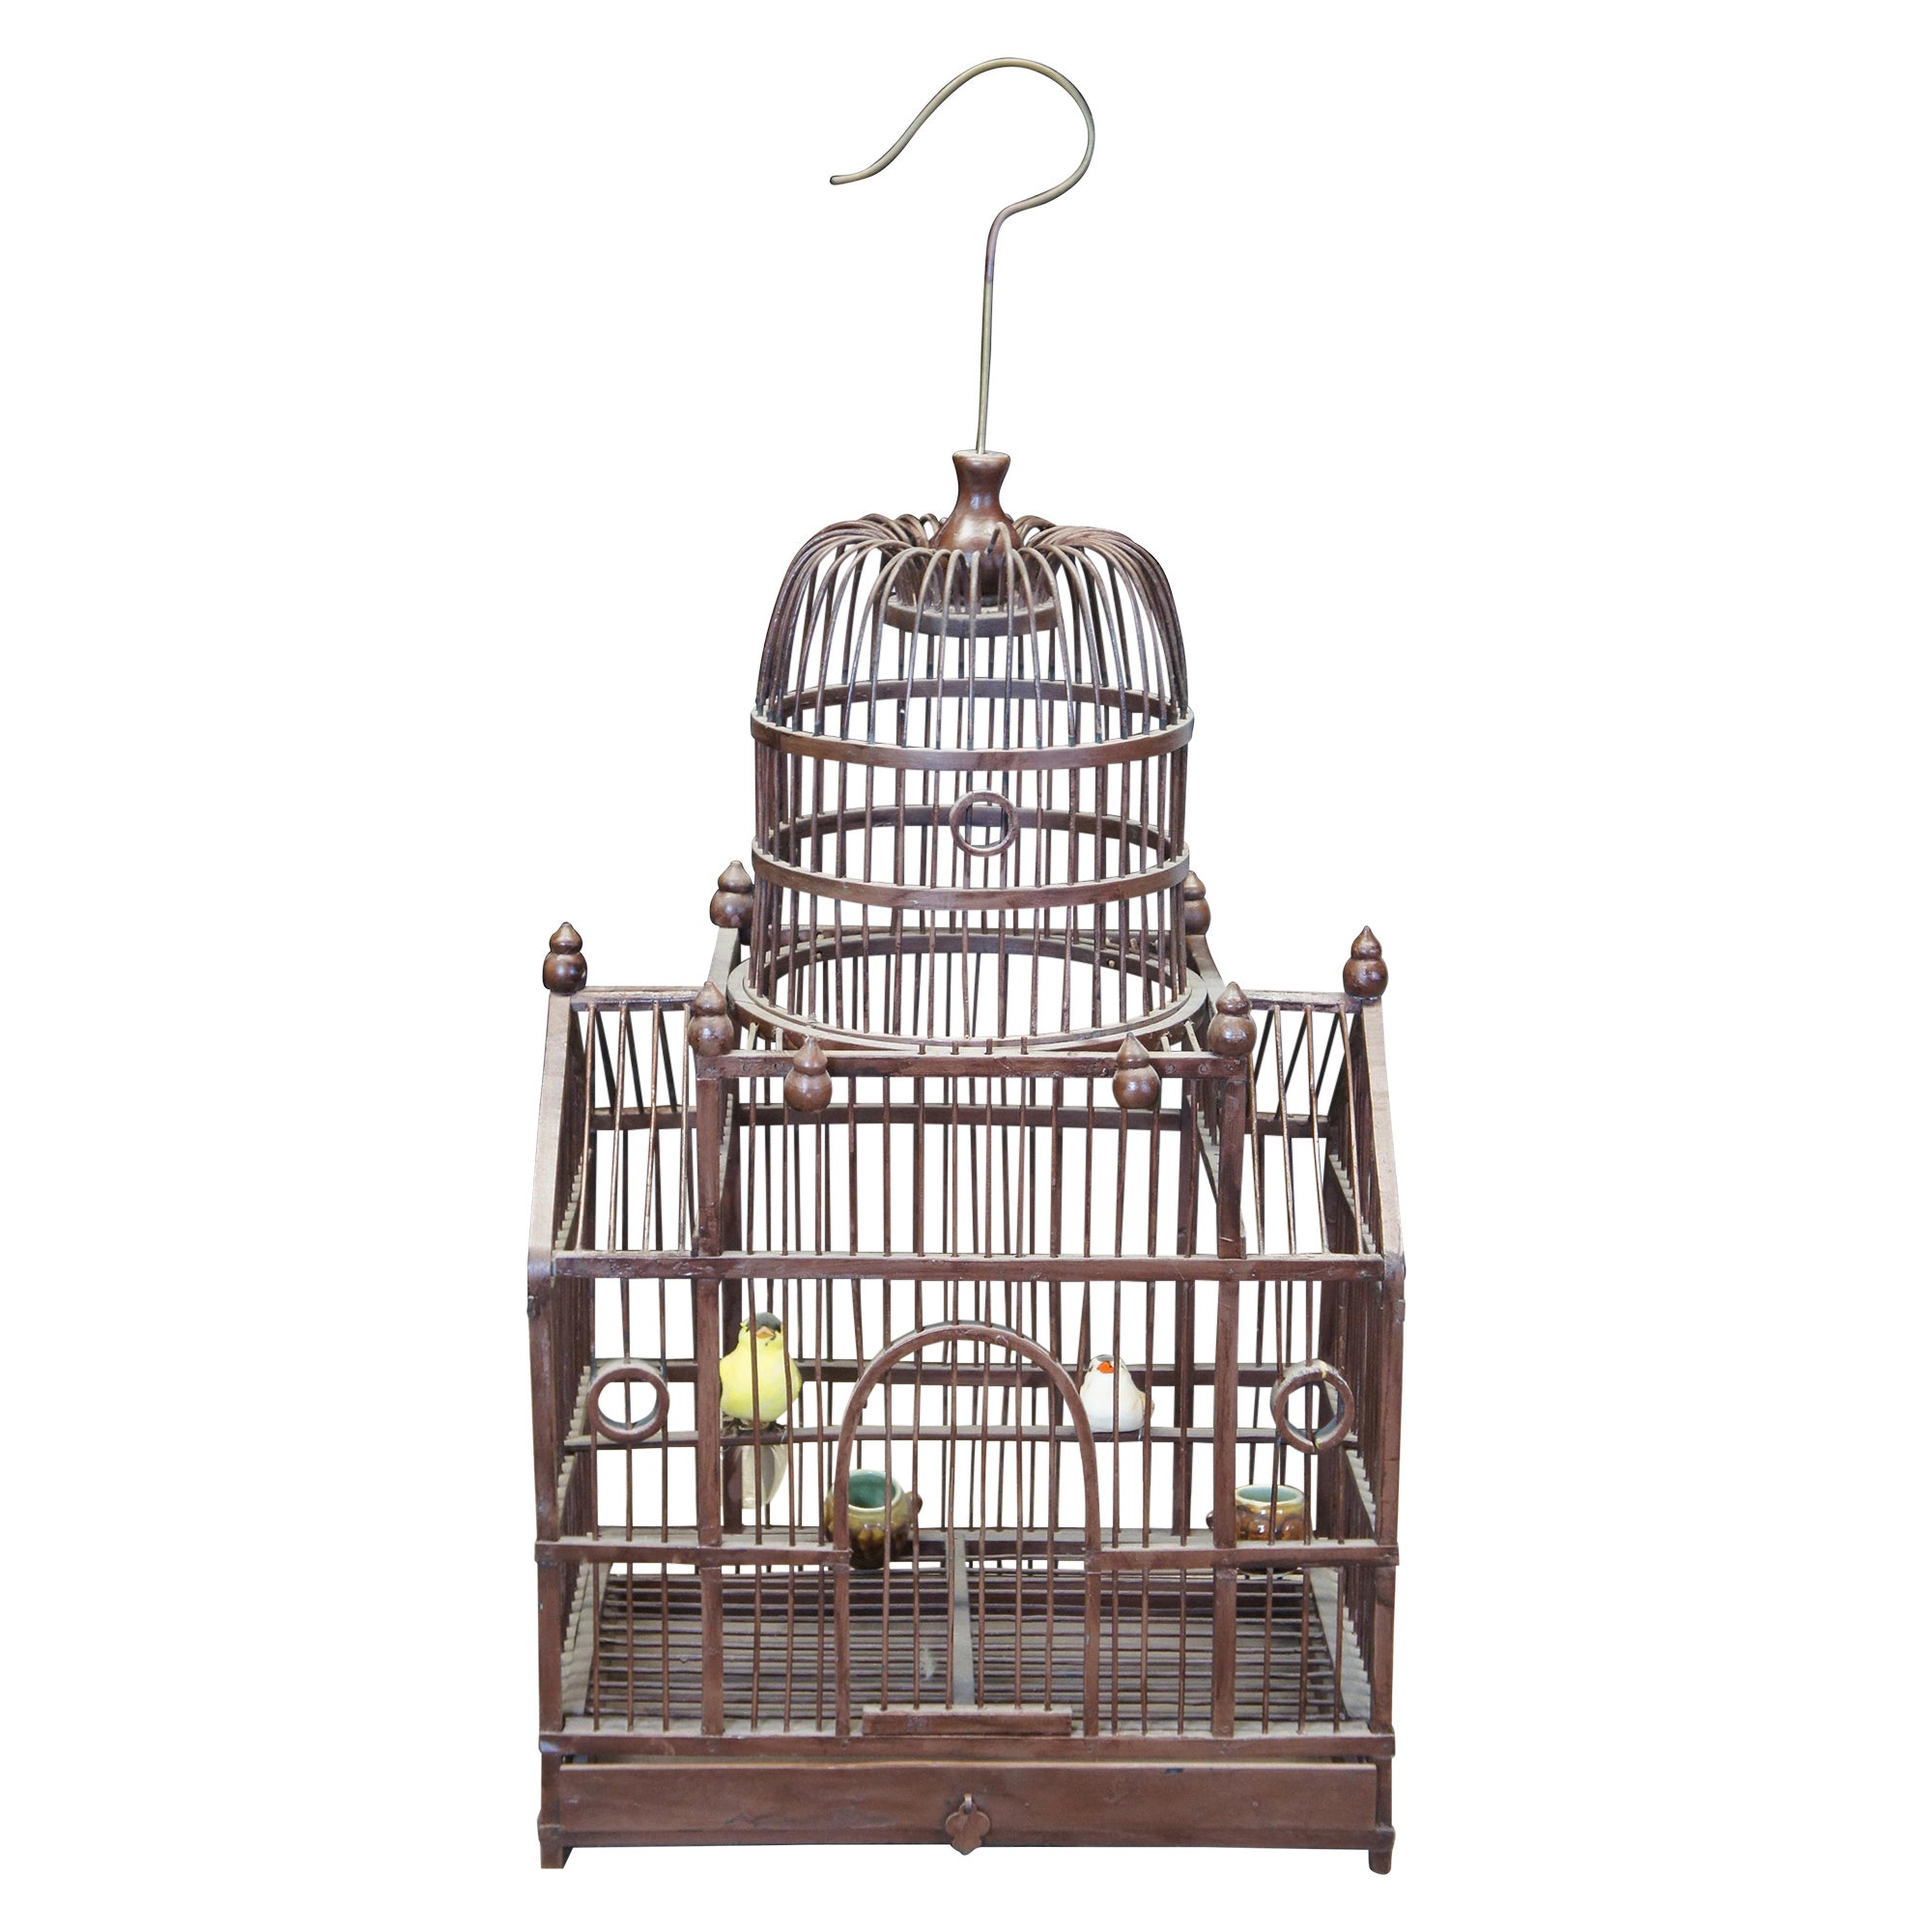 Victorian Revival Architectural Dome Top Hanging Bird Cage Feeder Cathedral 25"